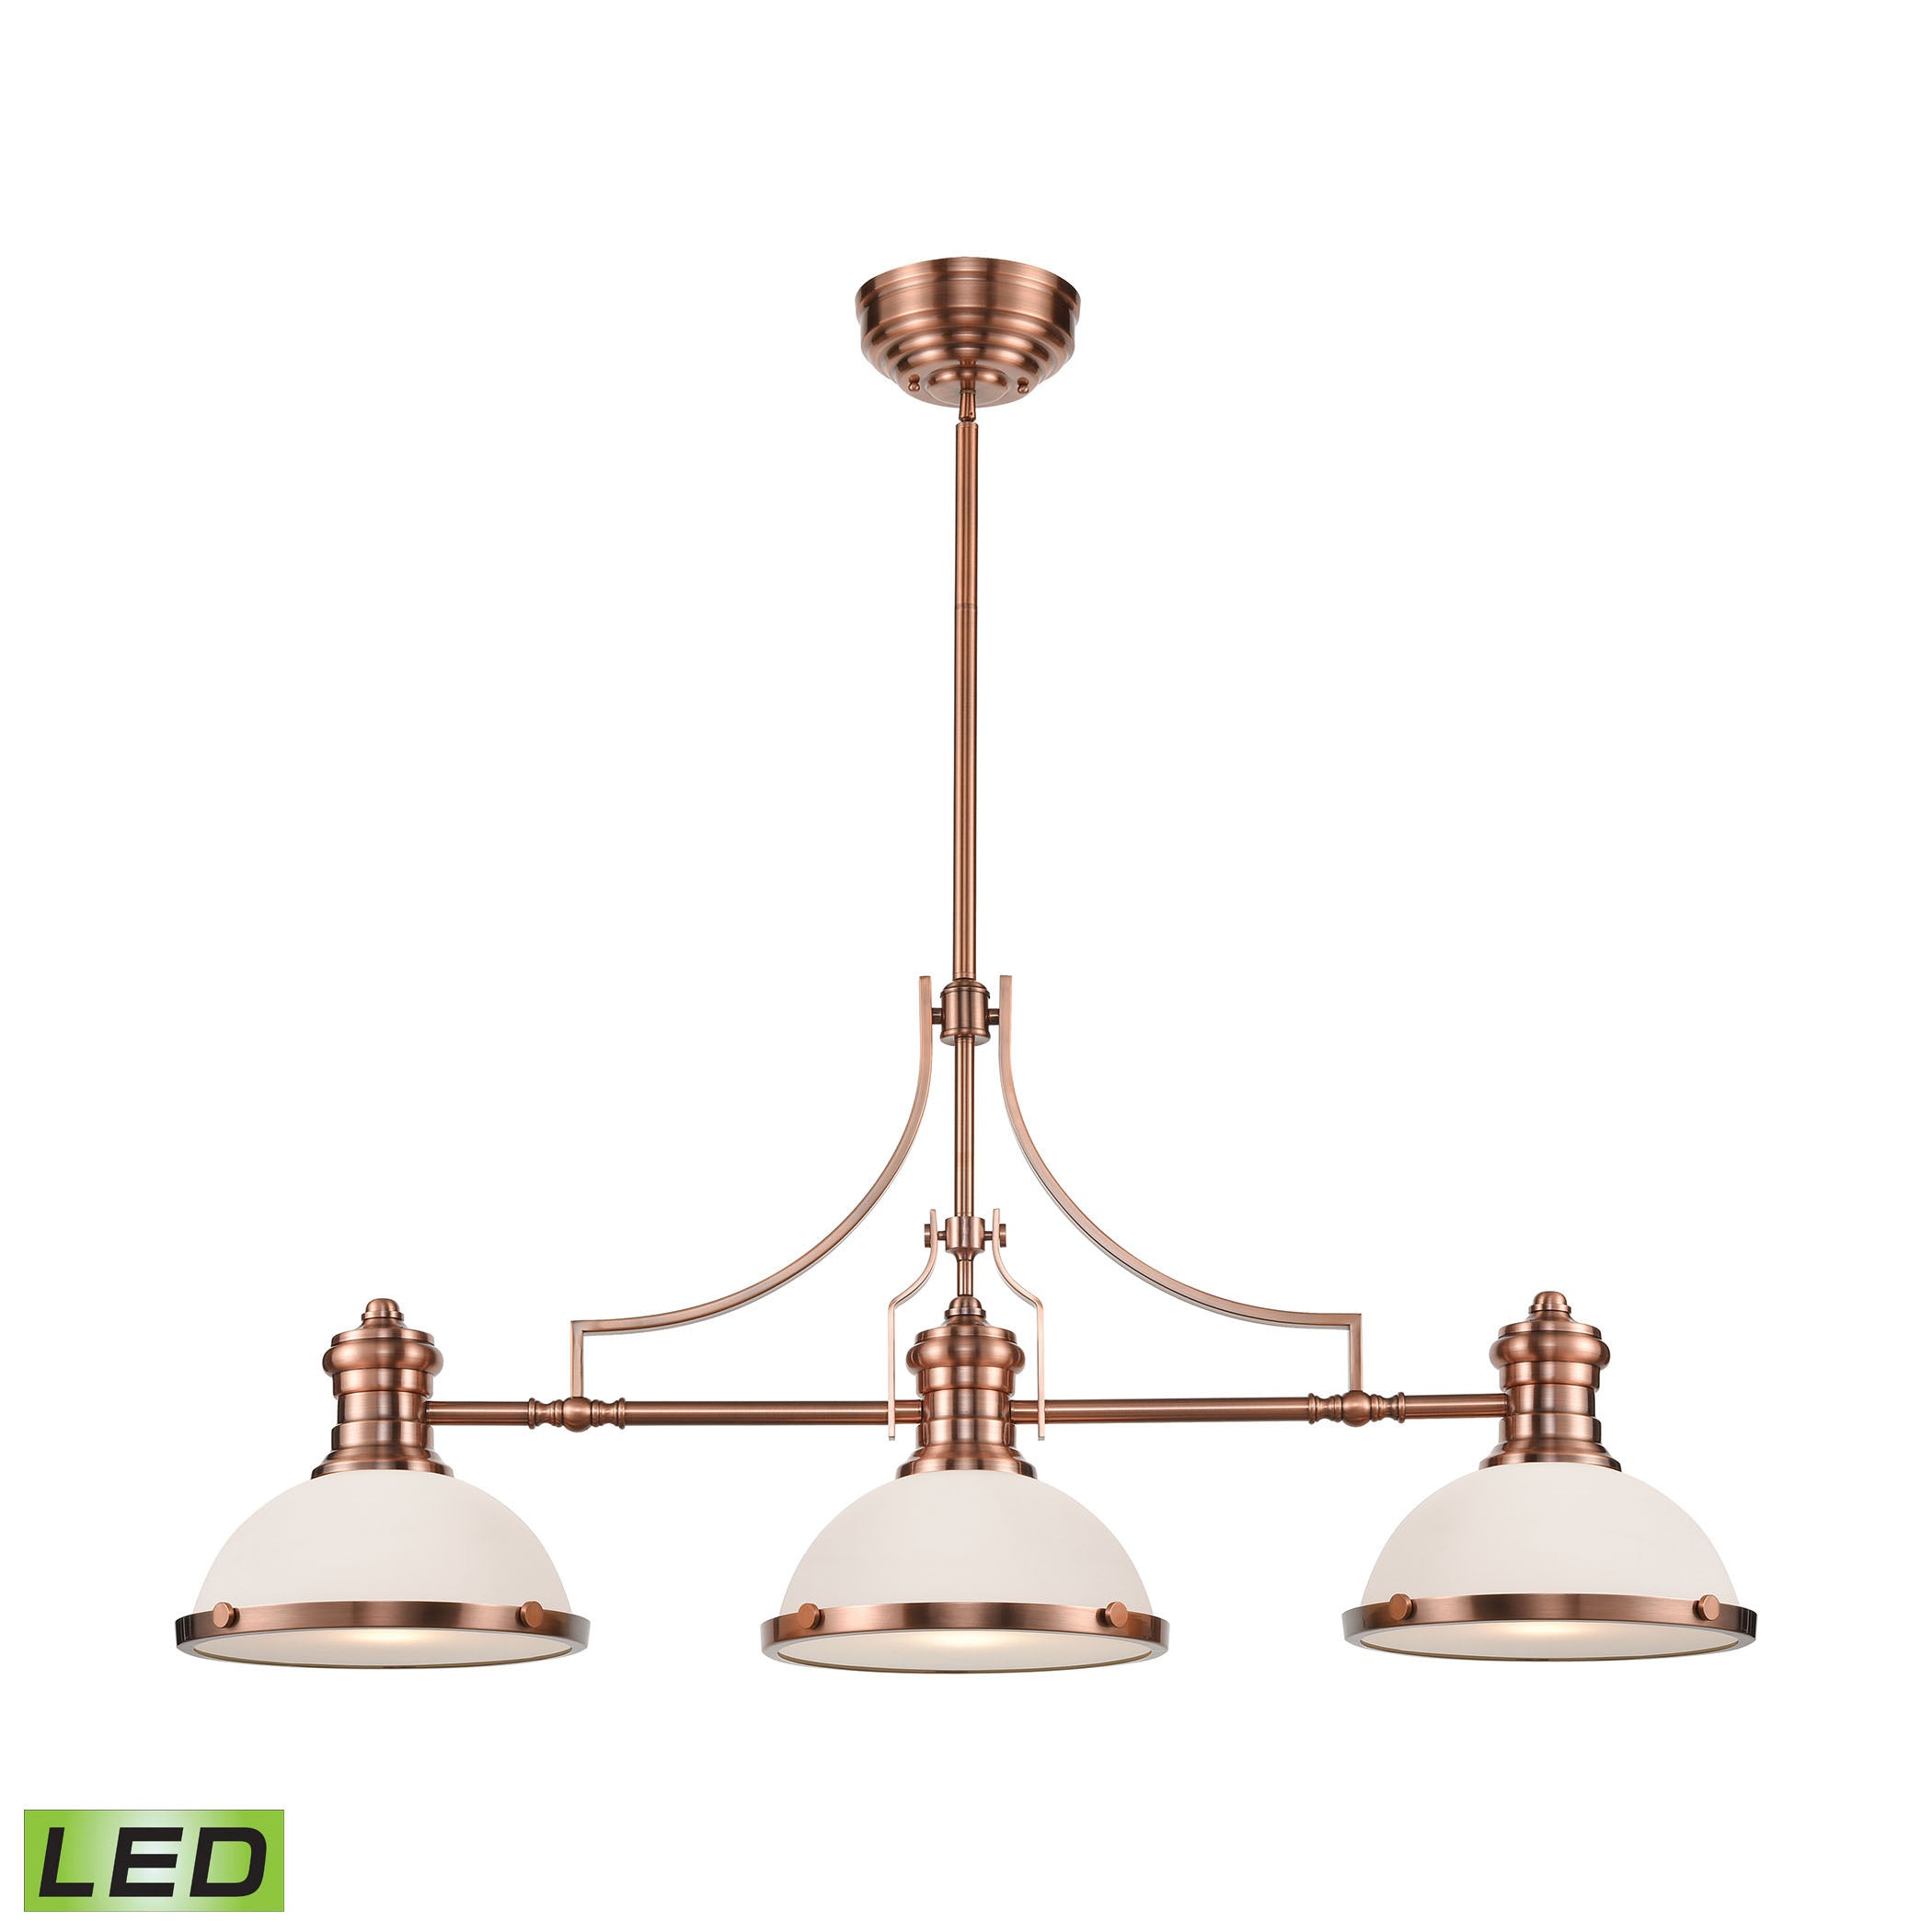 ELK Lighting 66245-3-LED Chadwick 3-Light Island Light in Antique Copper with White Glass - Includes LED Bulbs